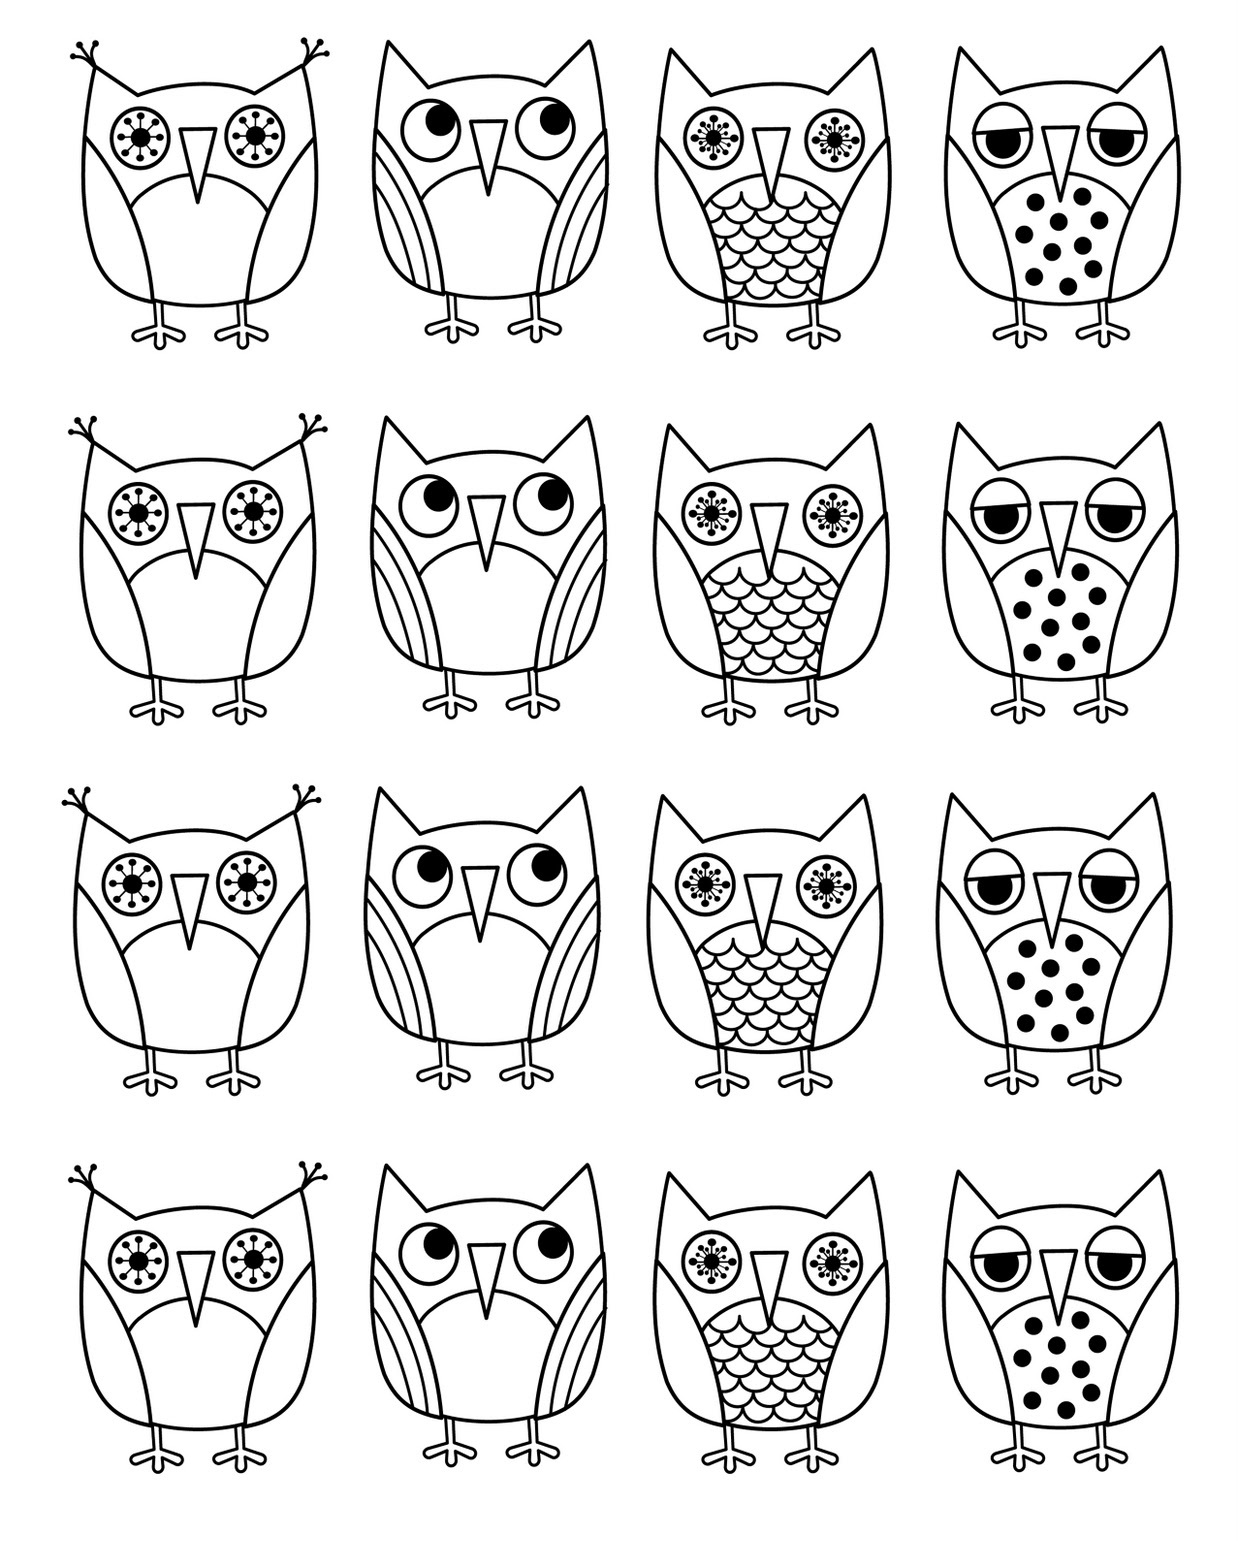 432 Cartoon Free Owl Printable Coloring Pages with disney character